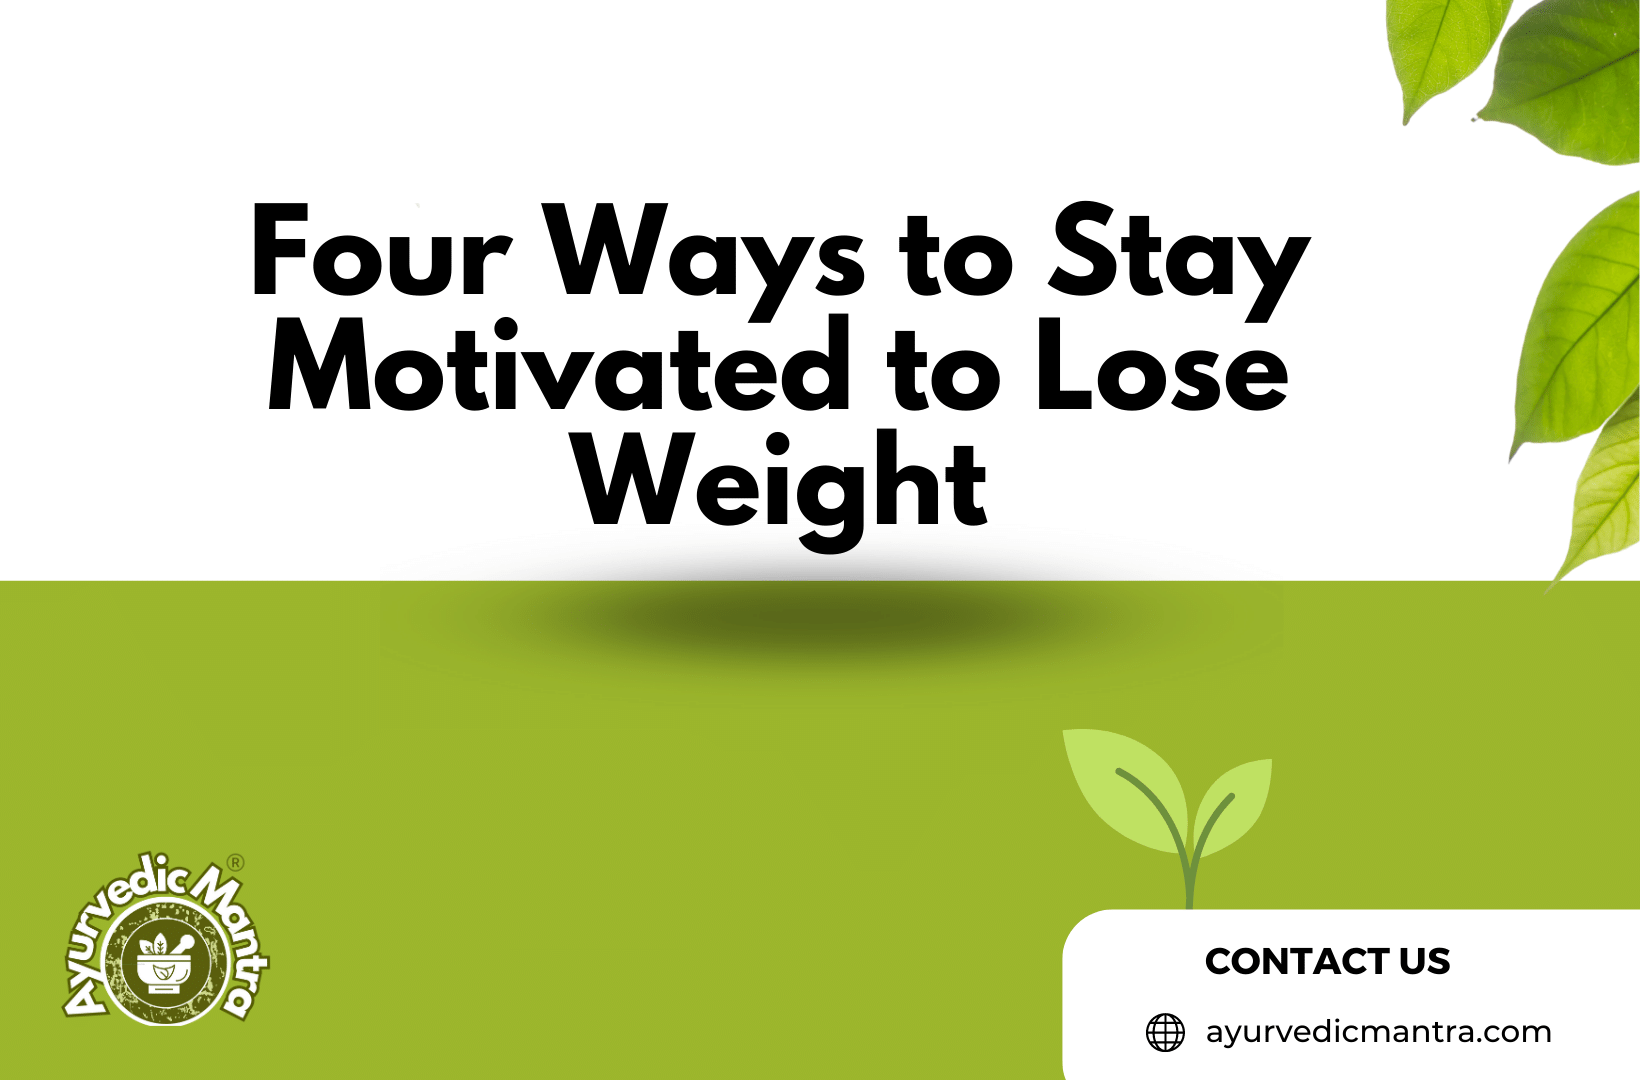 Four Ways to Stay Motivated to Lose Weight